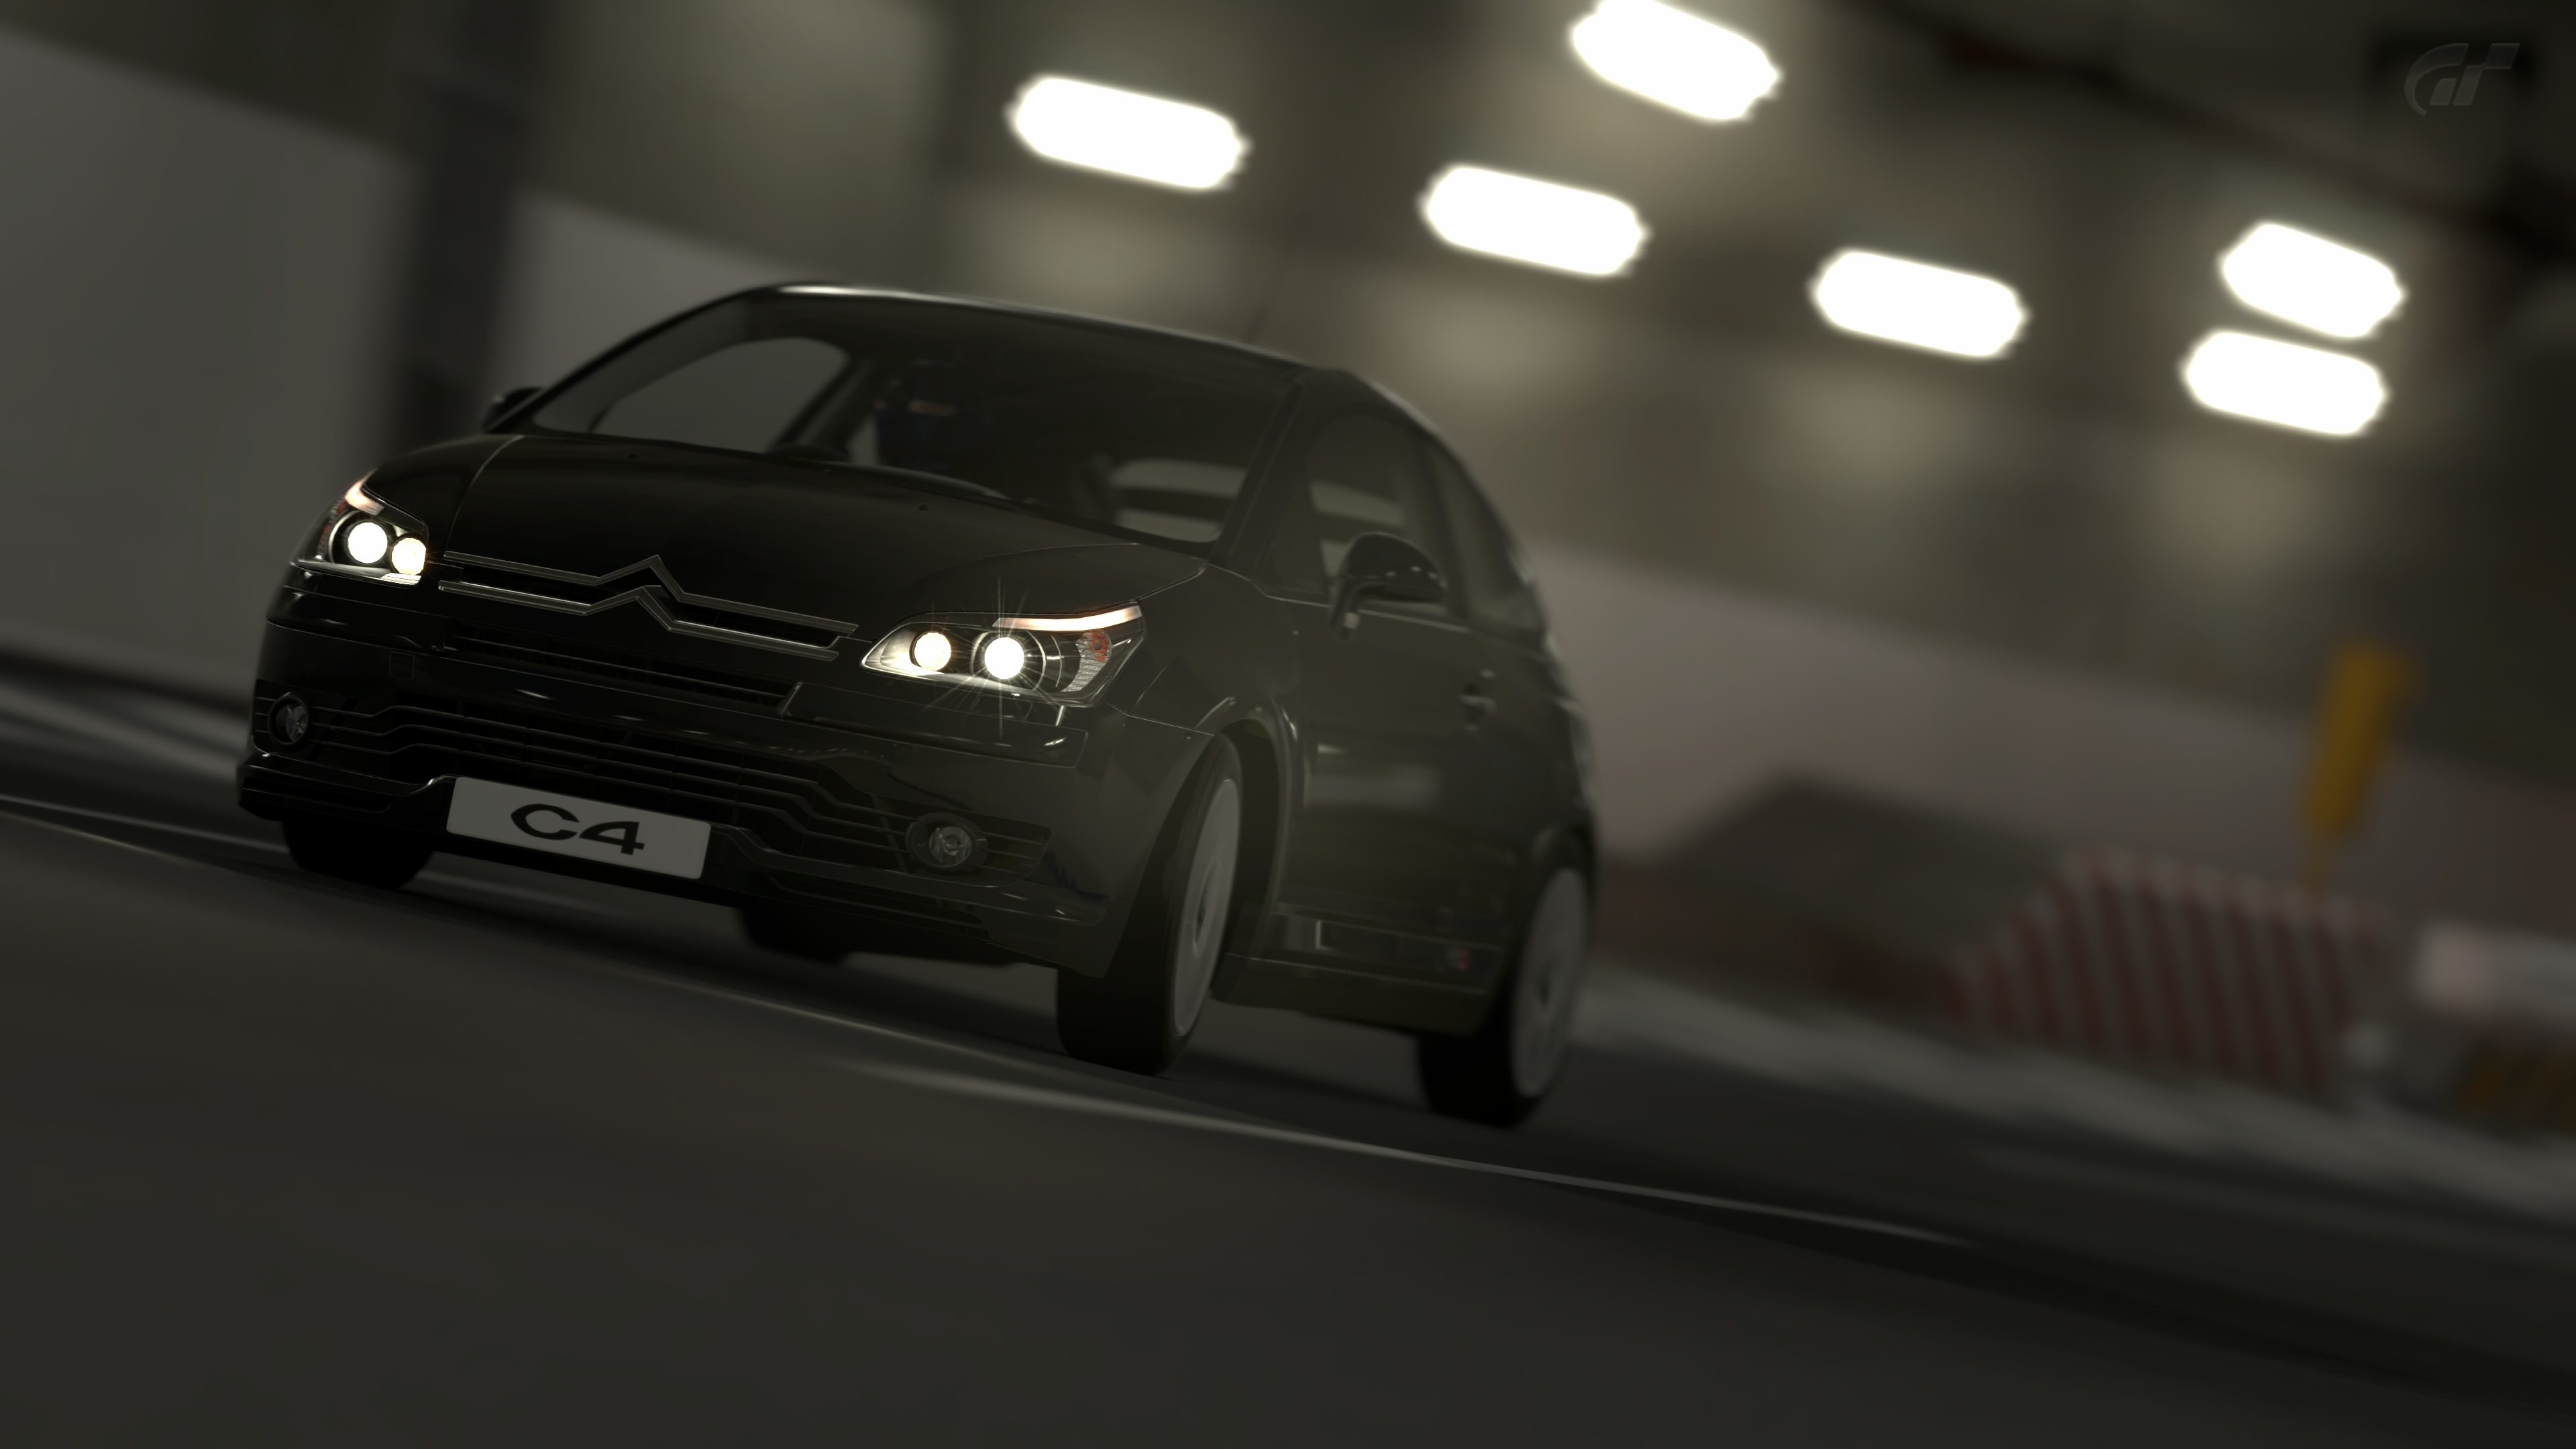 Letting loose the Citroën C4's Force in the SSR5 Tunnel.